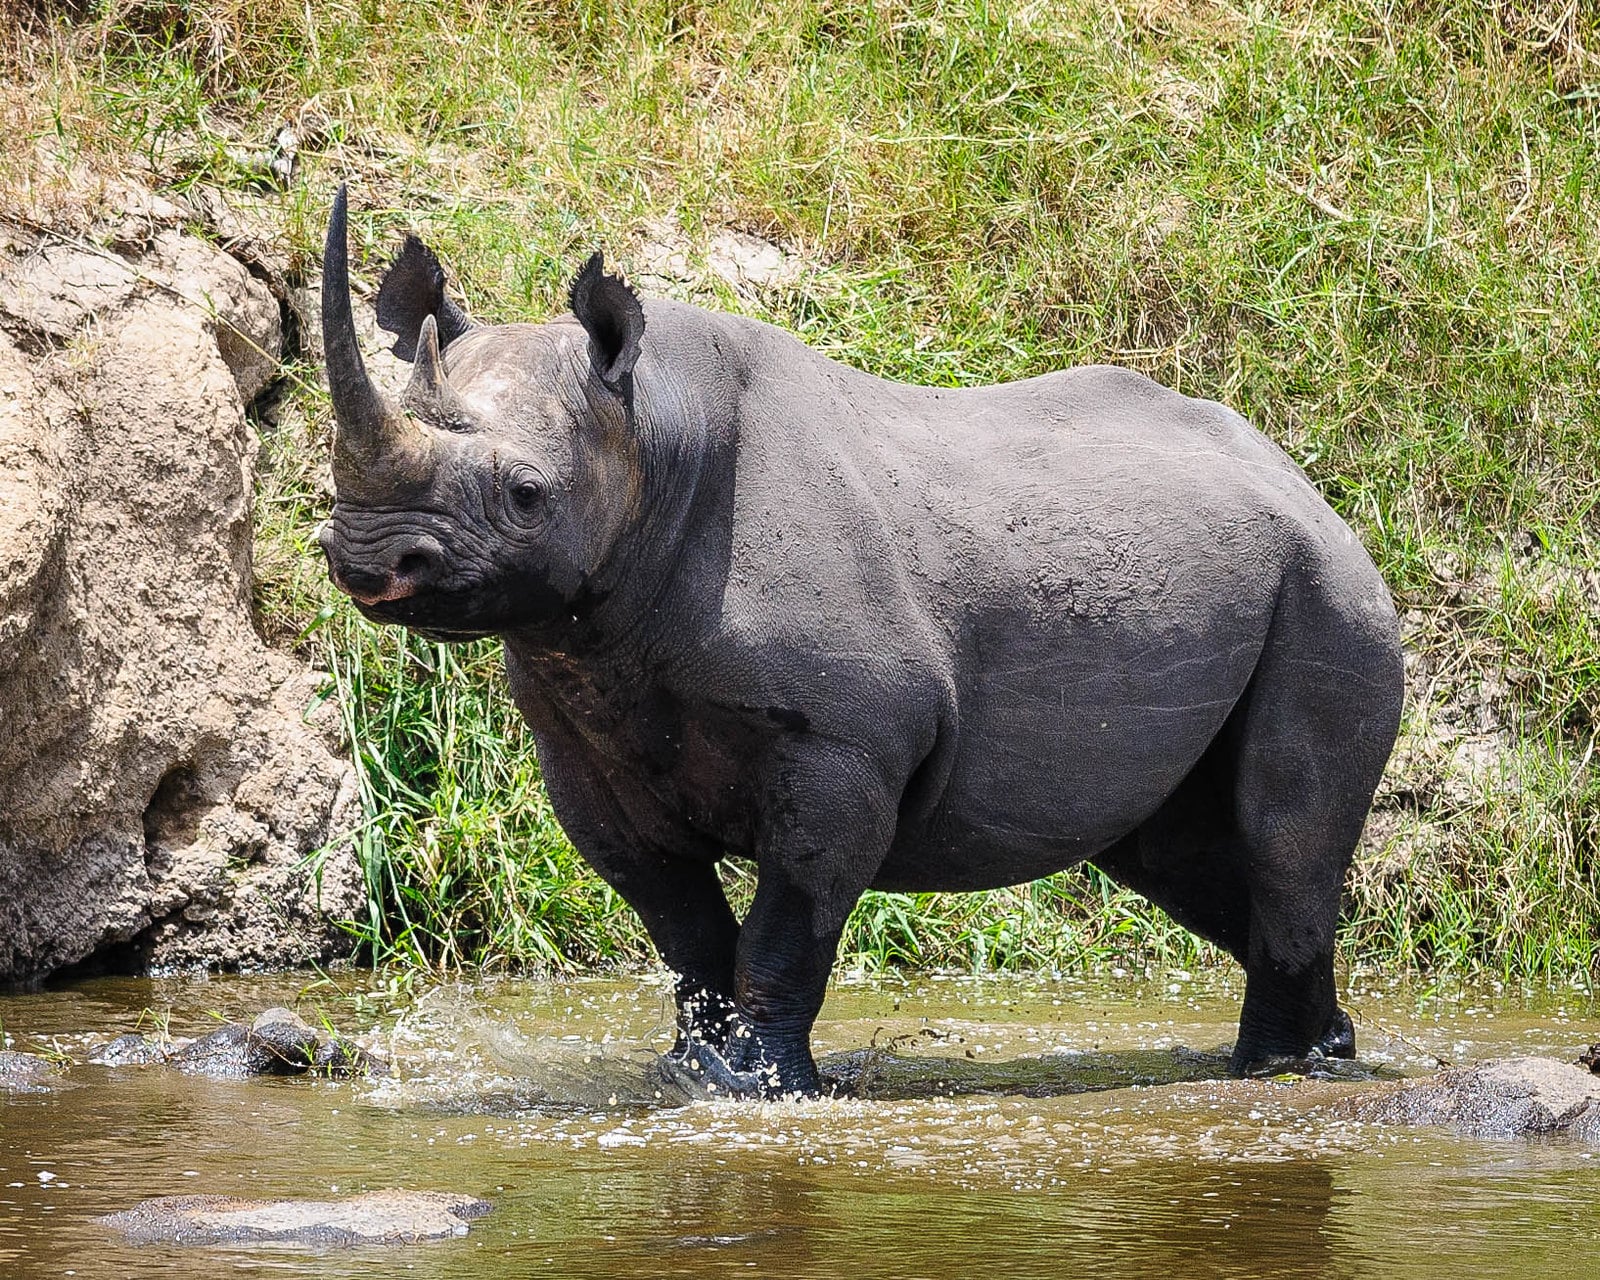 Photo credits to Flickr, “Black Rhino” by Scott Presnell used under CC BY-NC-ND 2.0